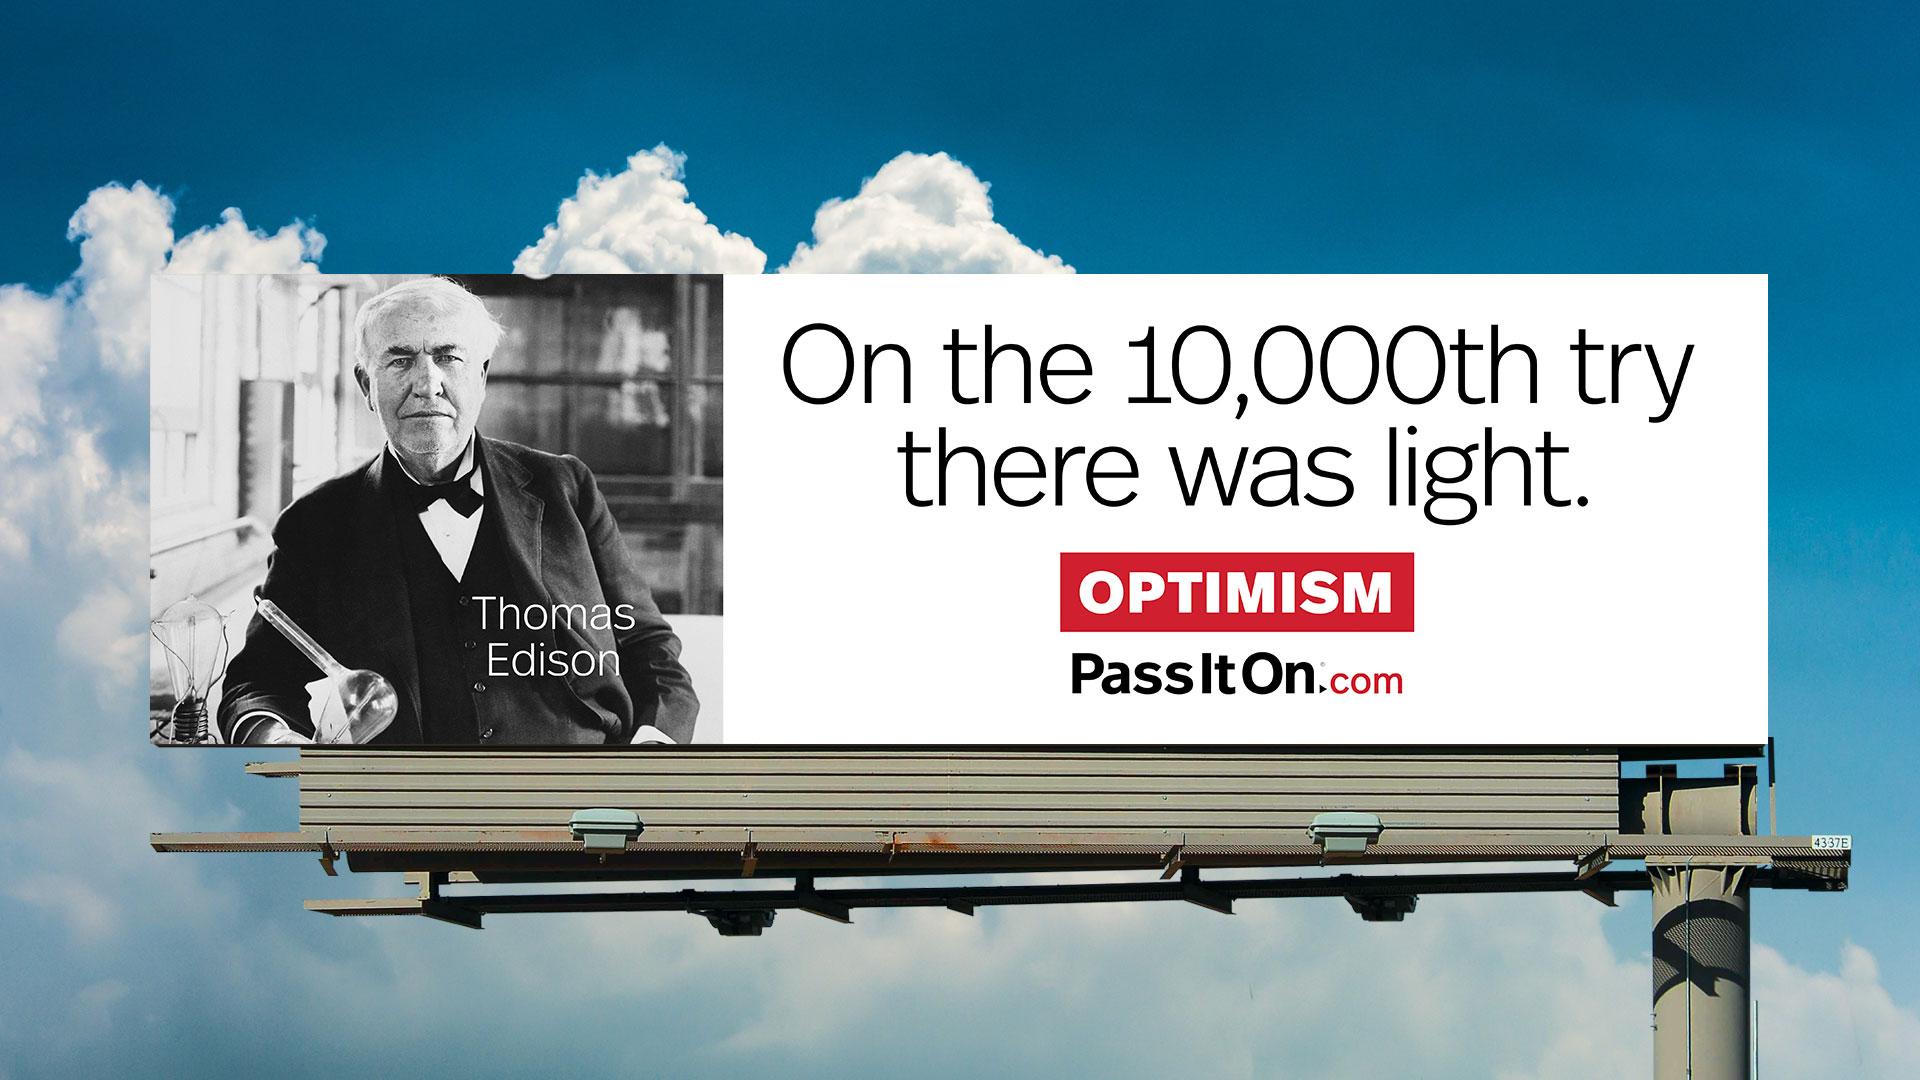 See the Thomas Edison Billboard and Pass it On